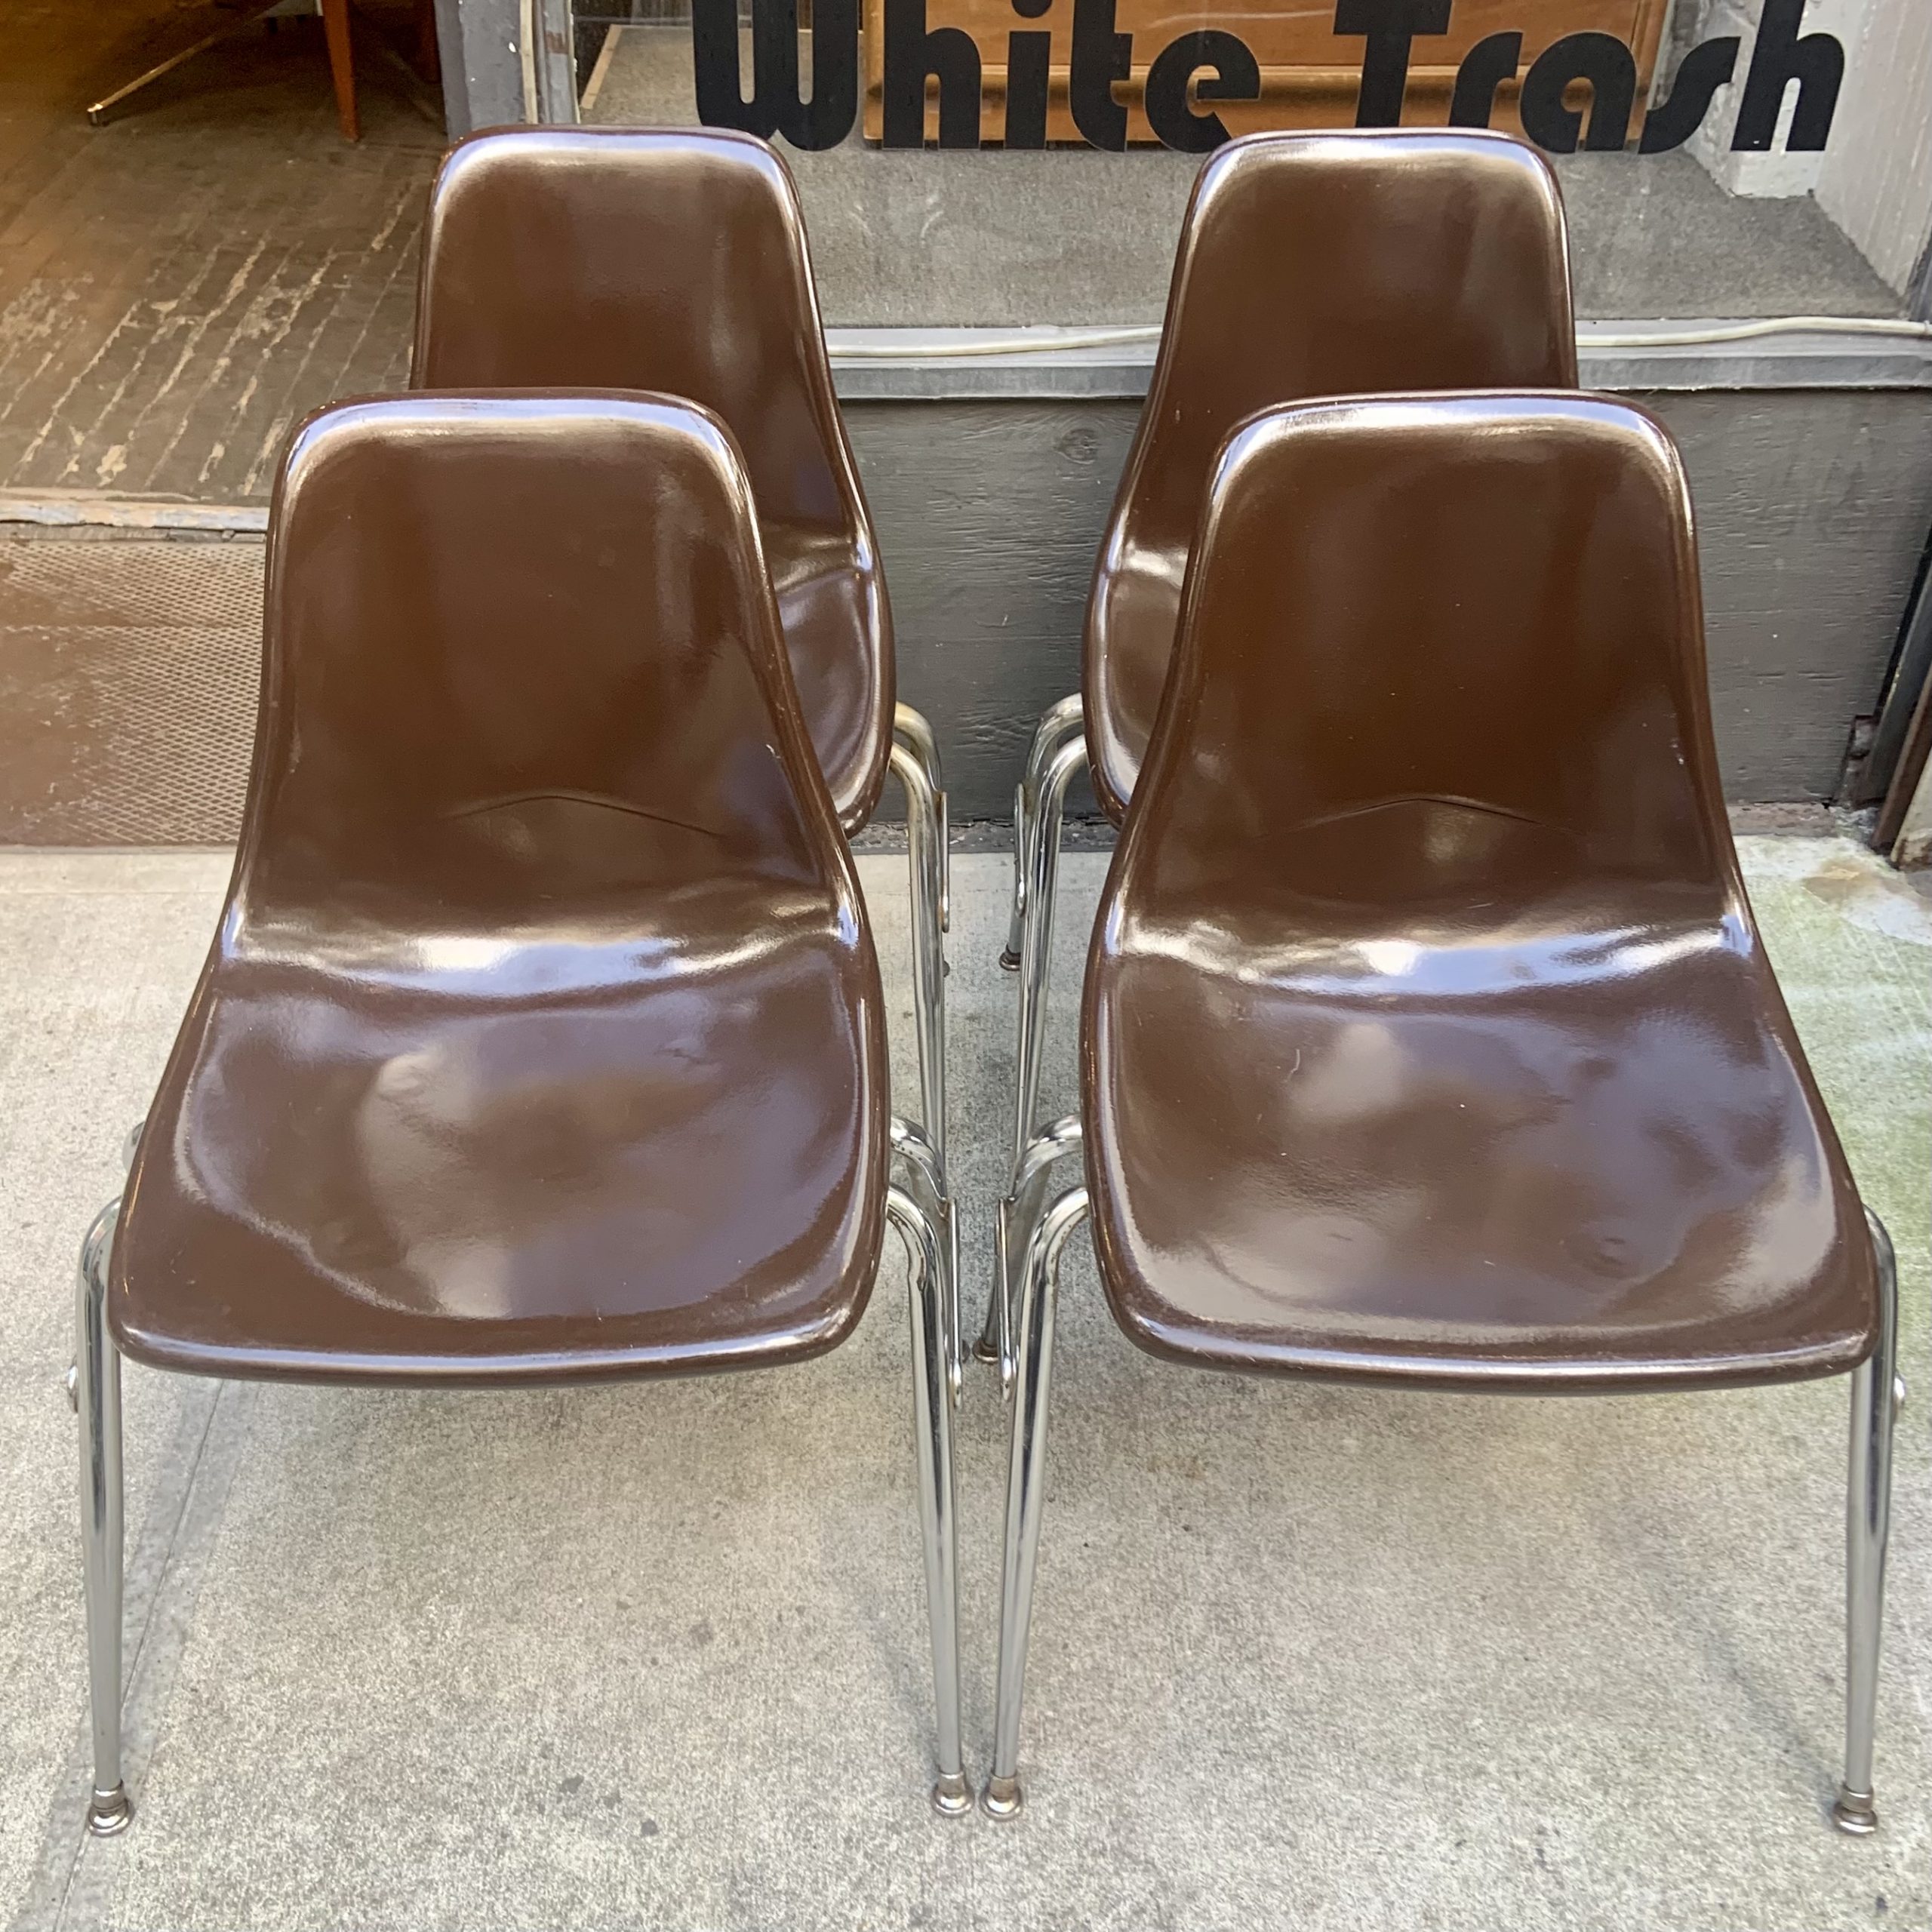 Fiberglass Side Chairs from the 1960s